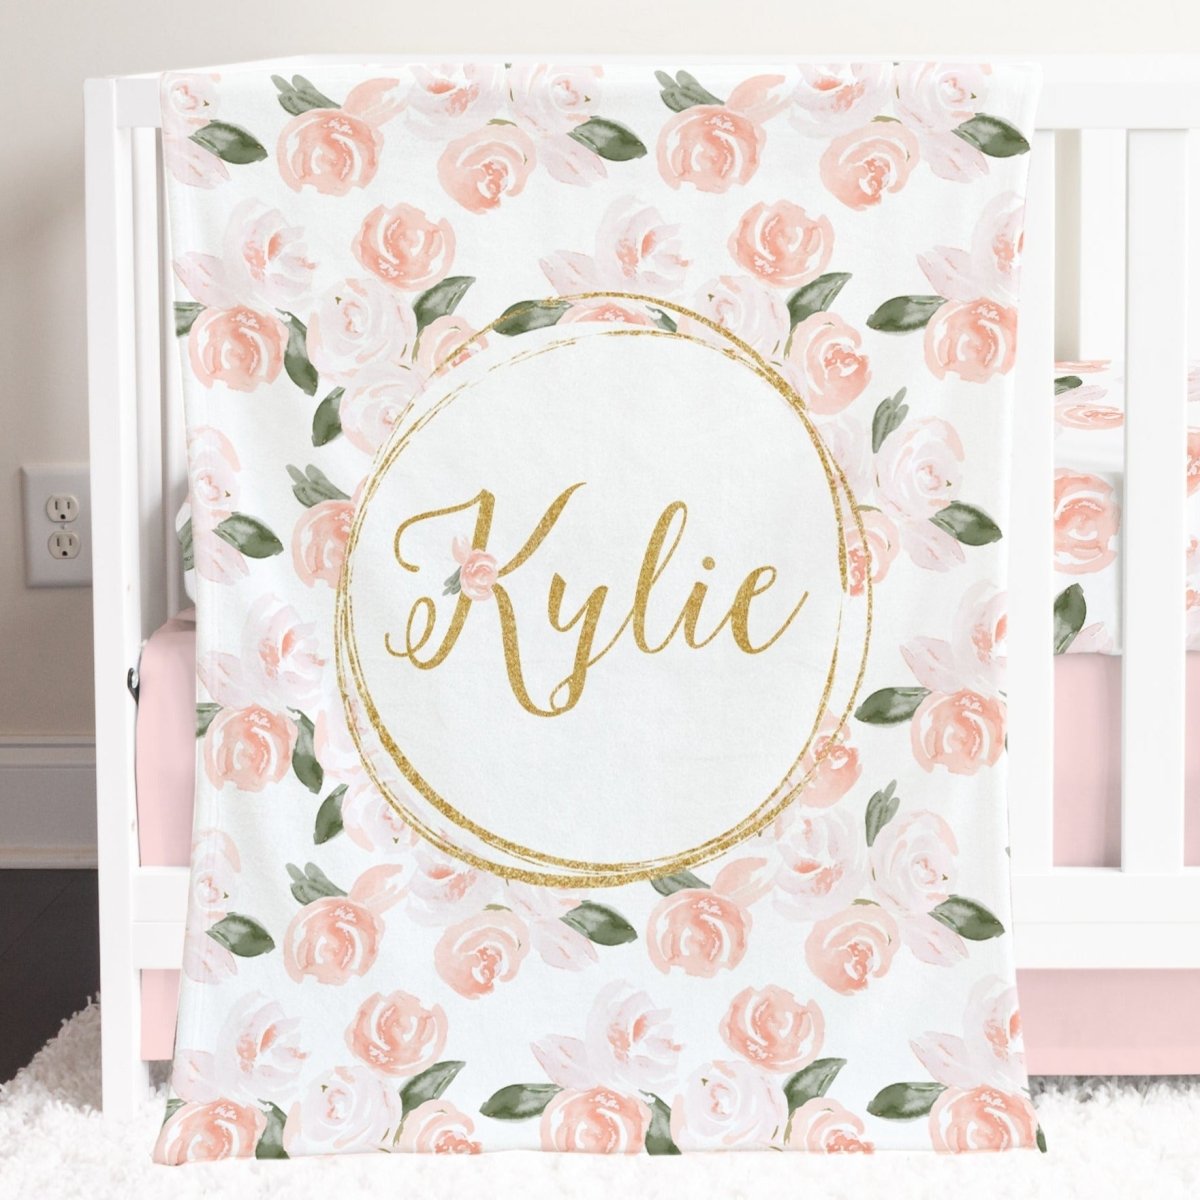 Watercolor Floral Personalized Minky Blanket - gender_girl, Personalized_Yes, text